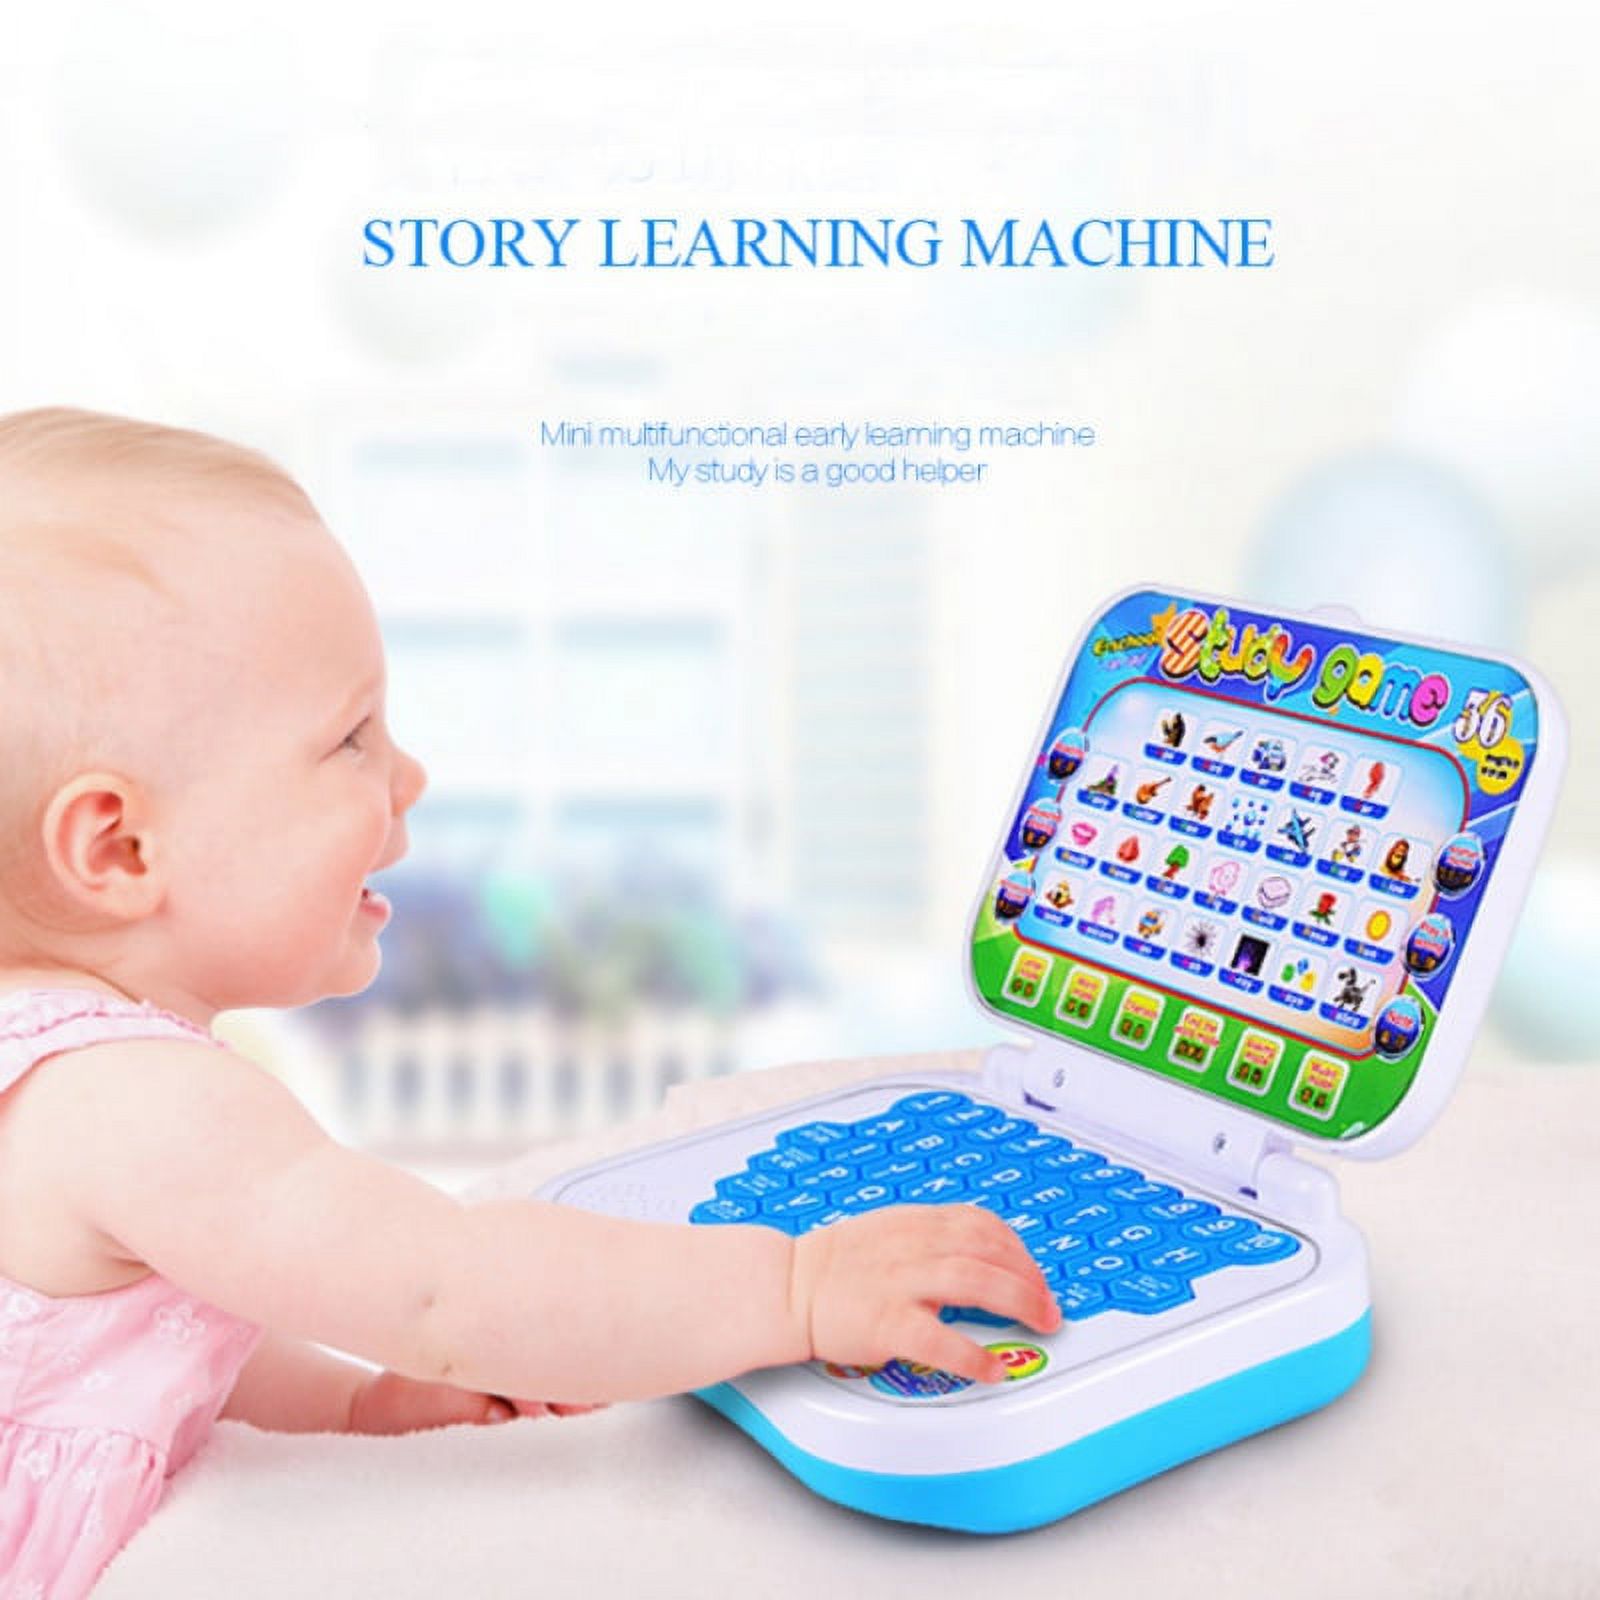 Toy Computer Laptop Tablet Baby Children Educational Learning Machine Toys Electronic Kids Study Game - image 1 of 14